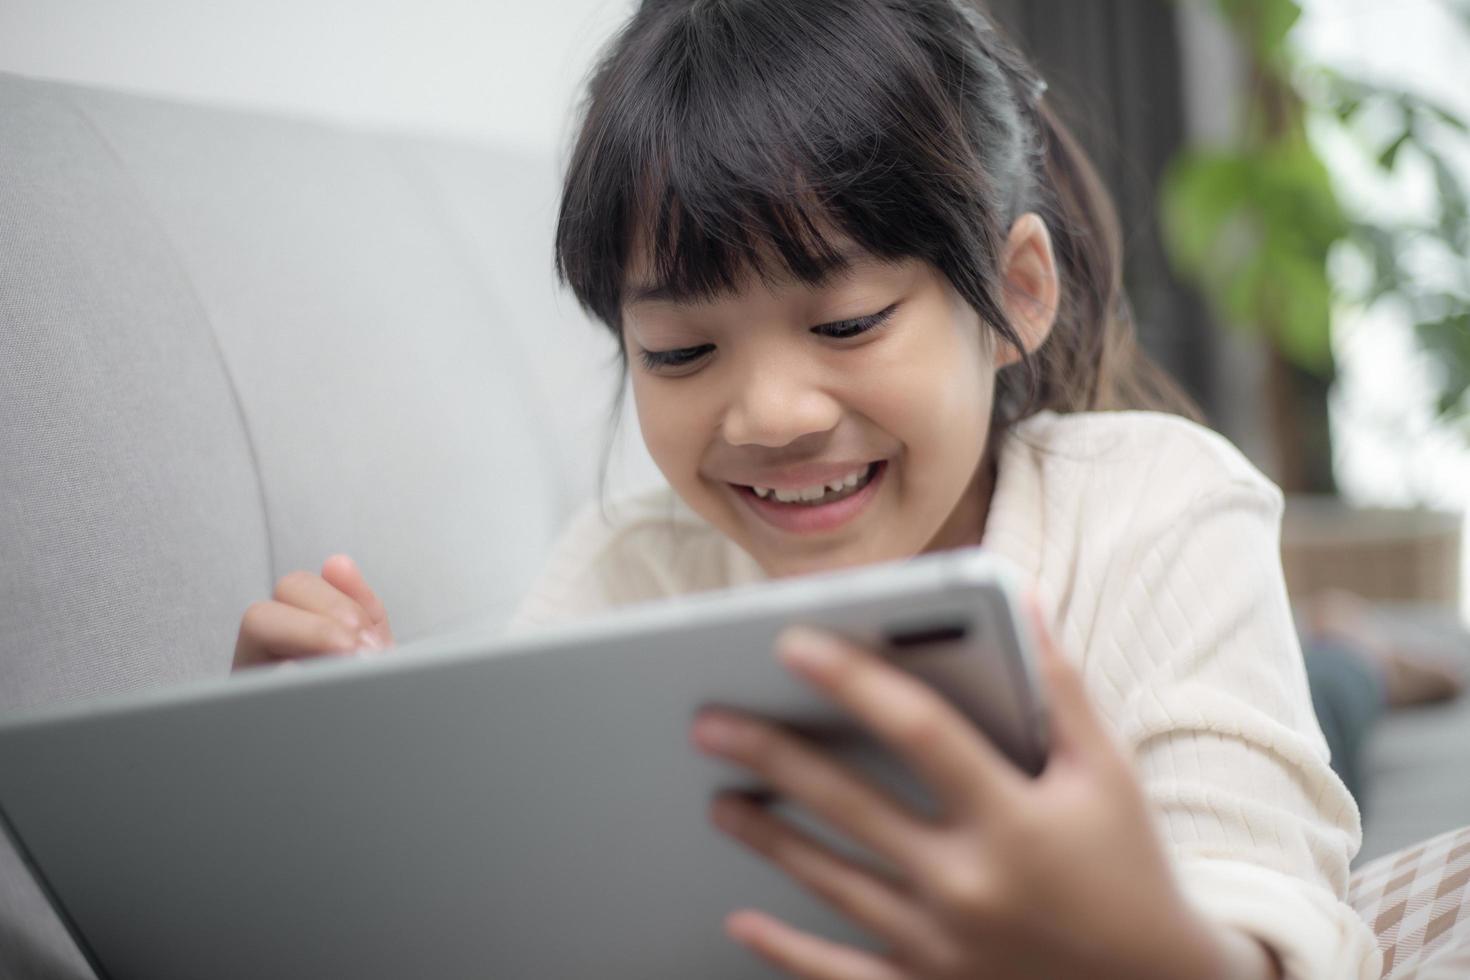 Little girl using tablet playing game on the internet, Kid sitting on sofa watching or talking with a friend online, Child relaxing in living room in the morning, Children with New Technology concept photo